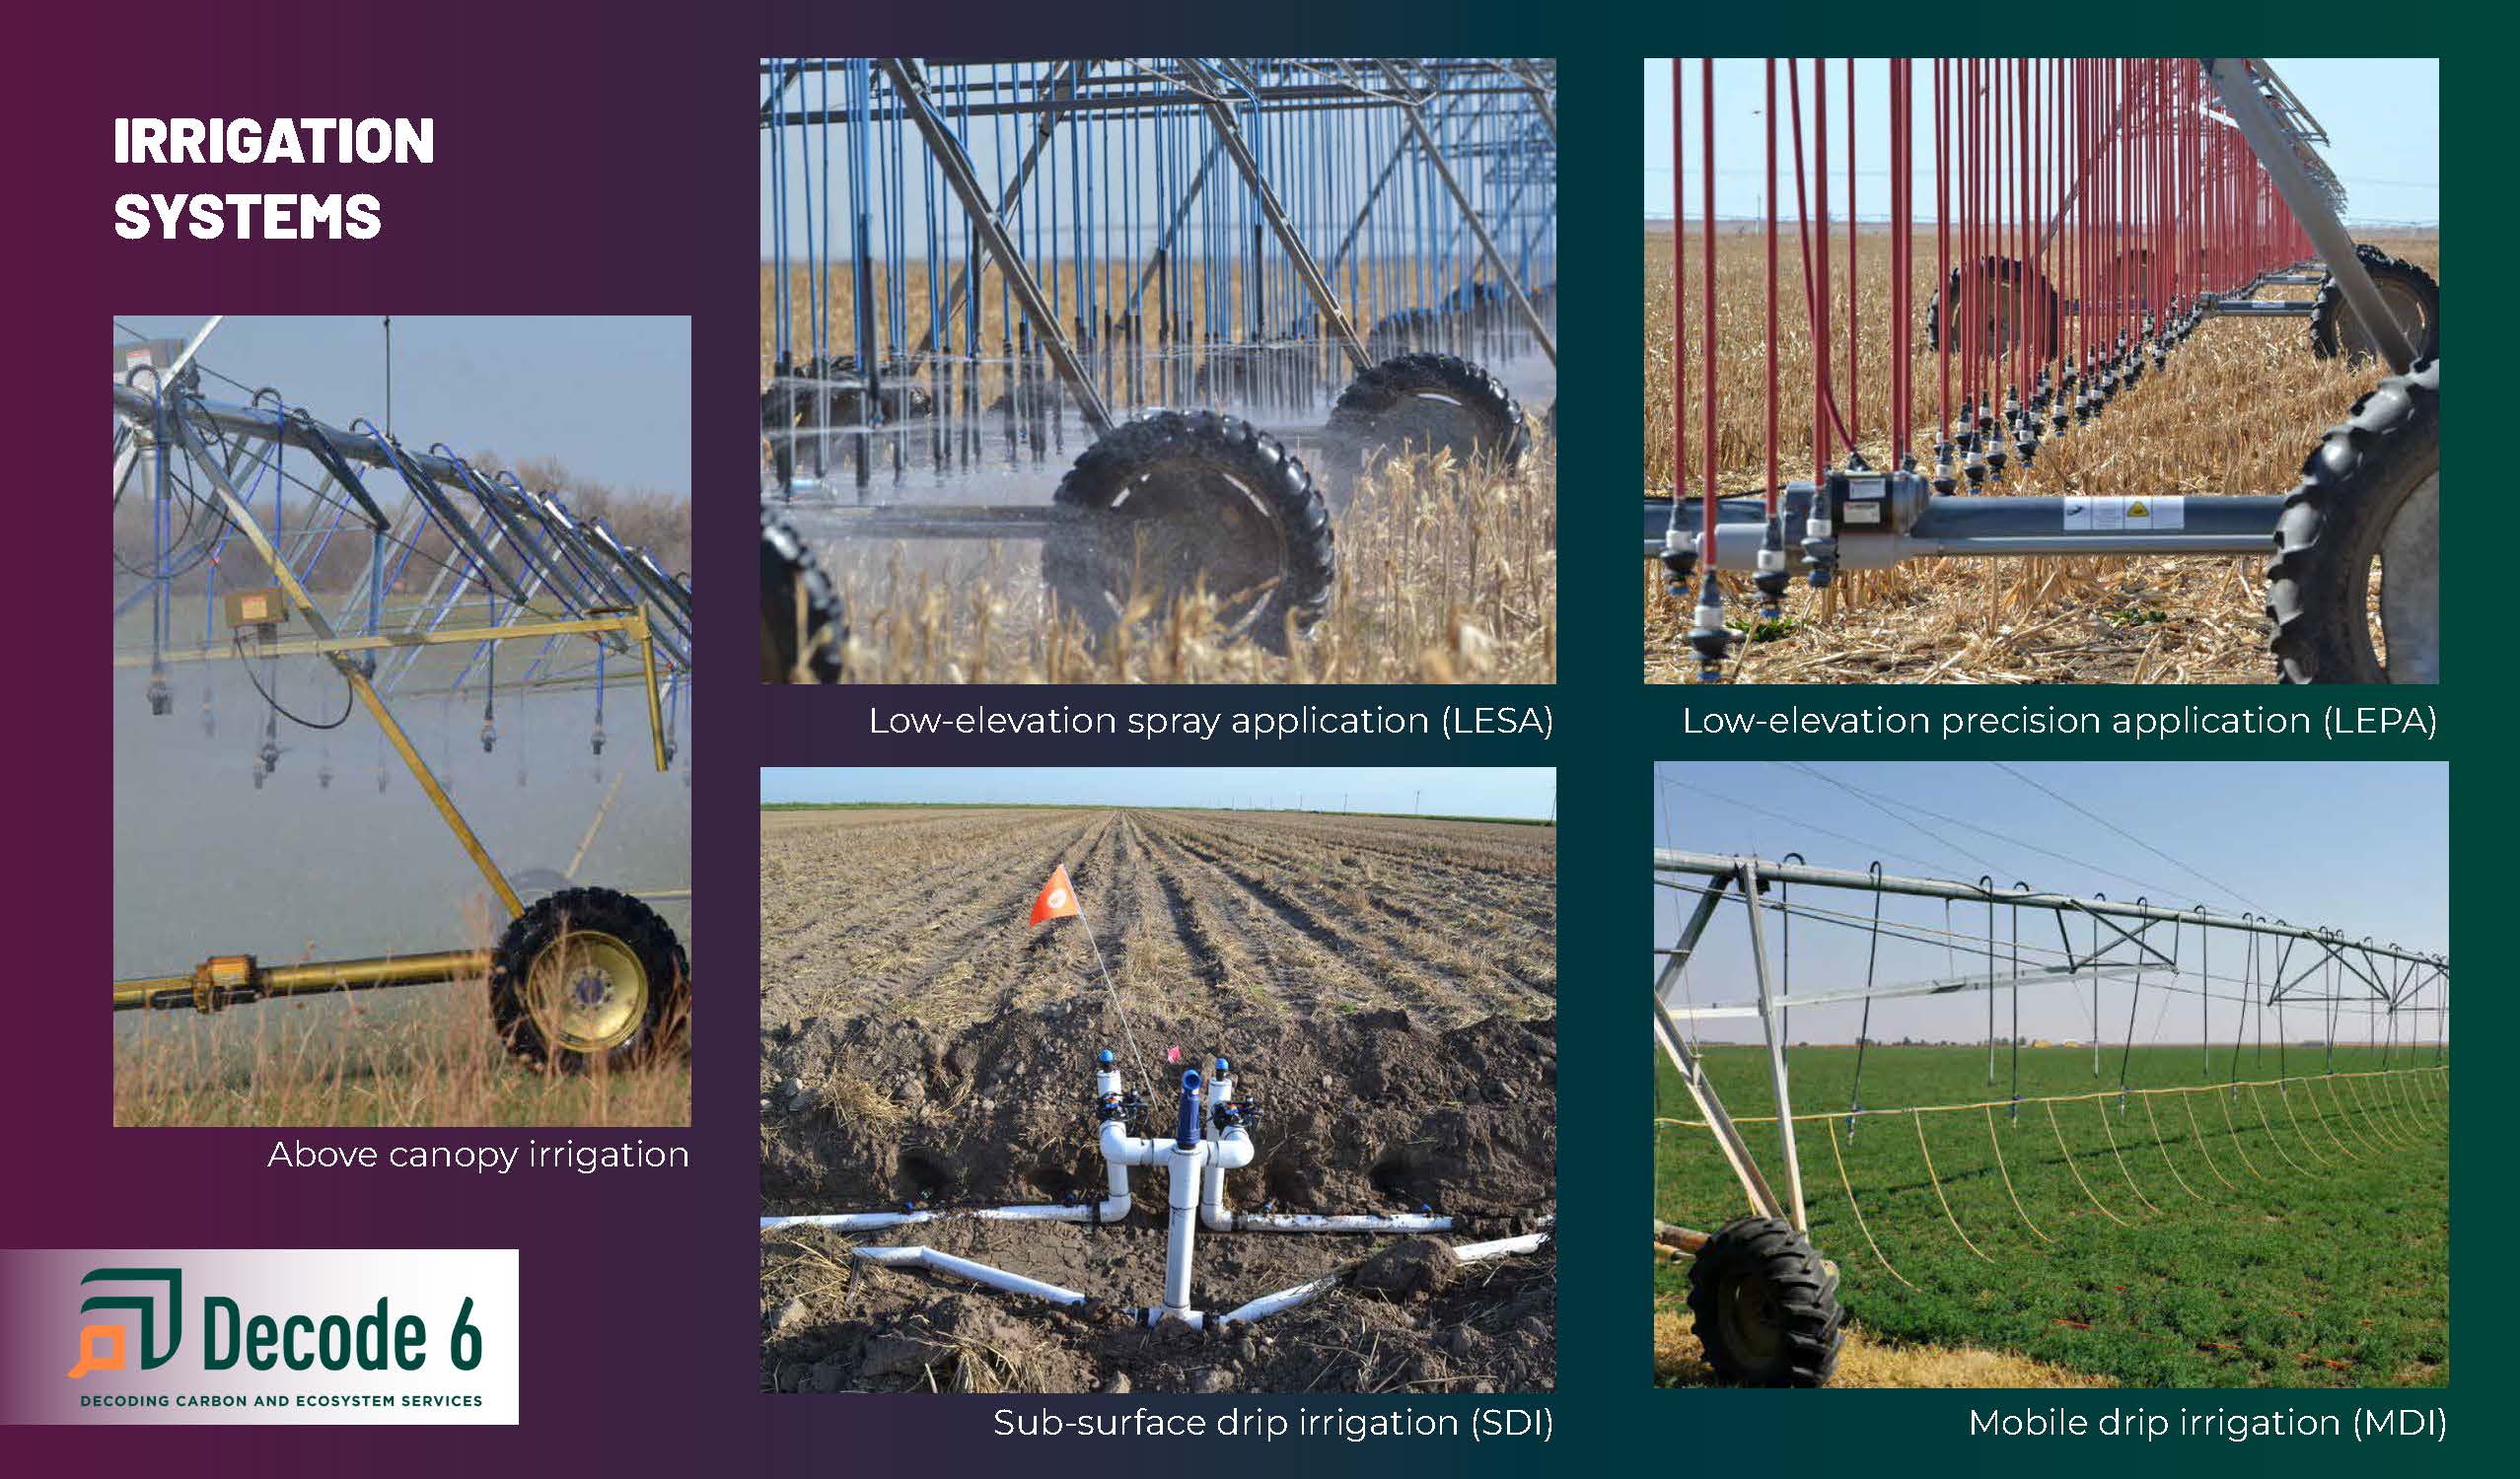 An image shows five different irrigation types including above canopy, low-elevation spray application, low-elevation precision application, mobile drip irrigation, and sub-surface drip irrigation.